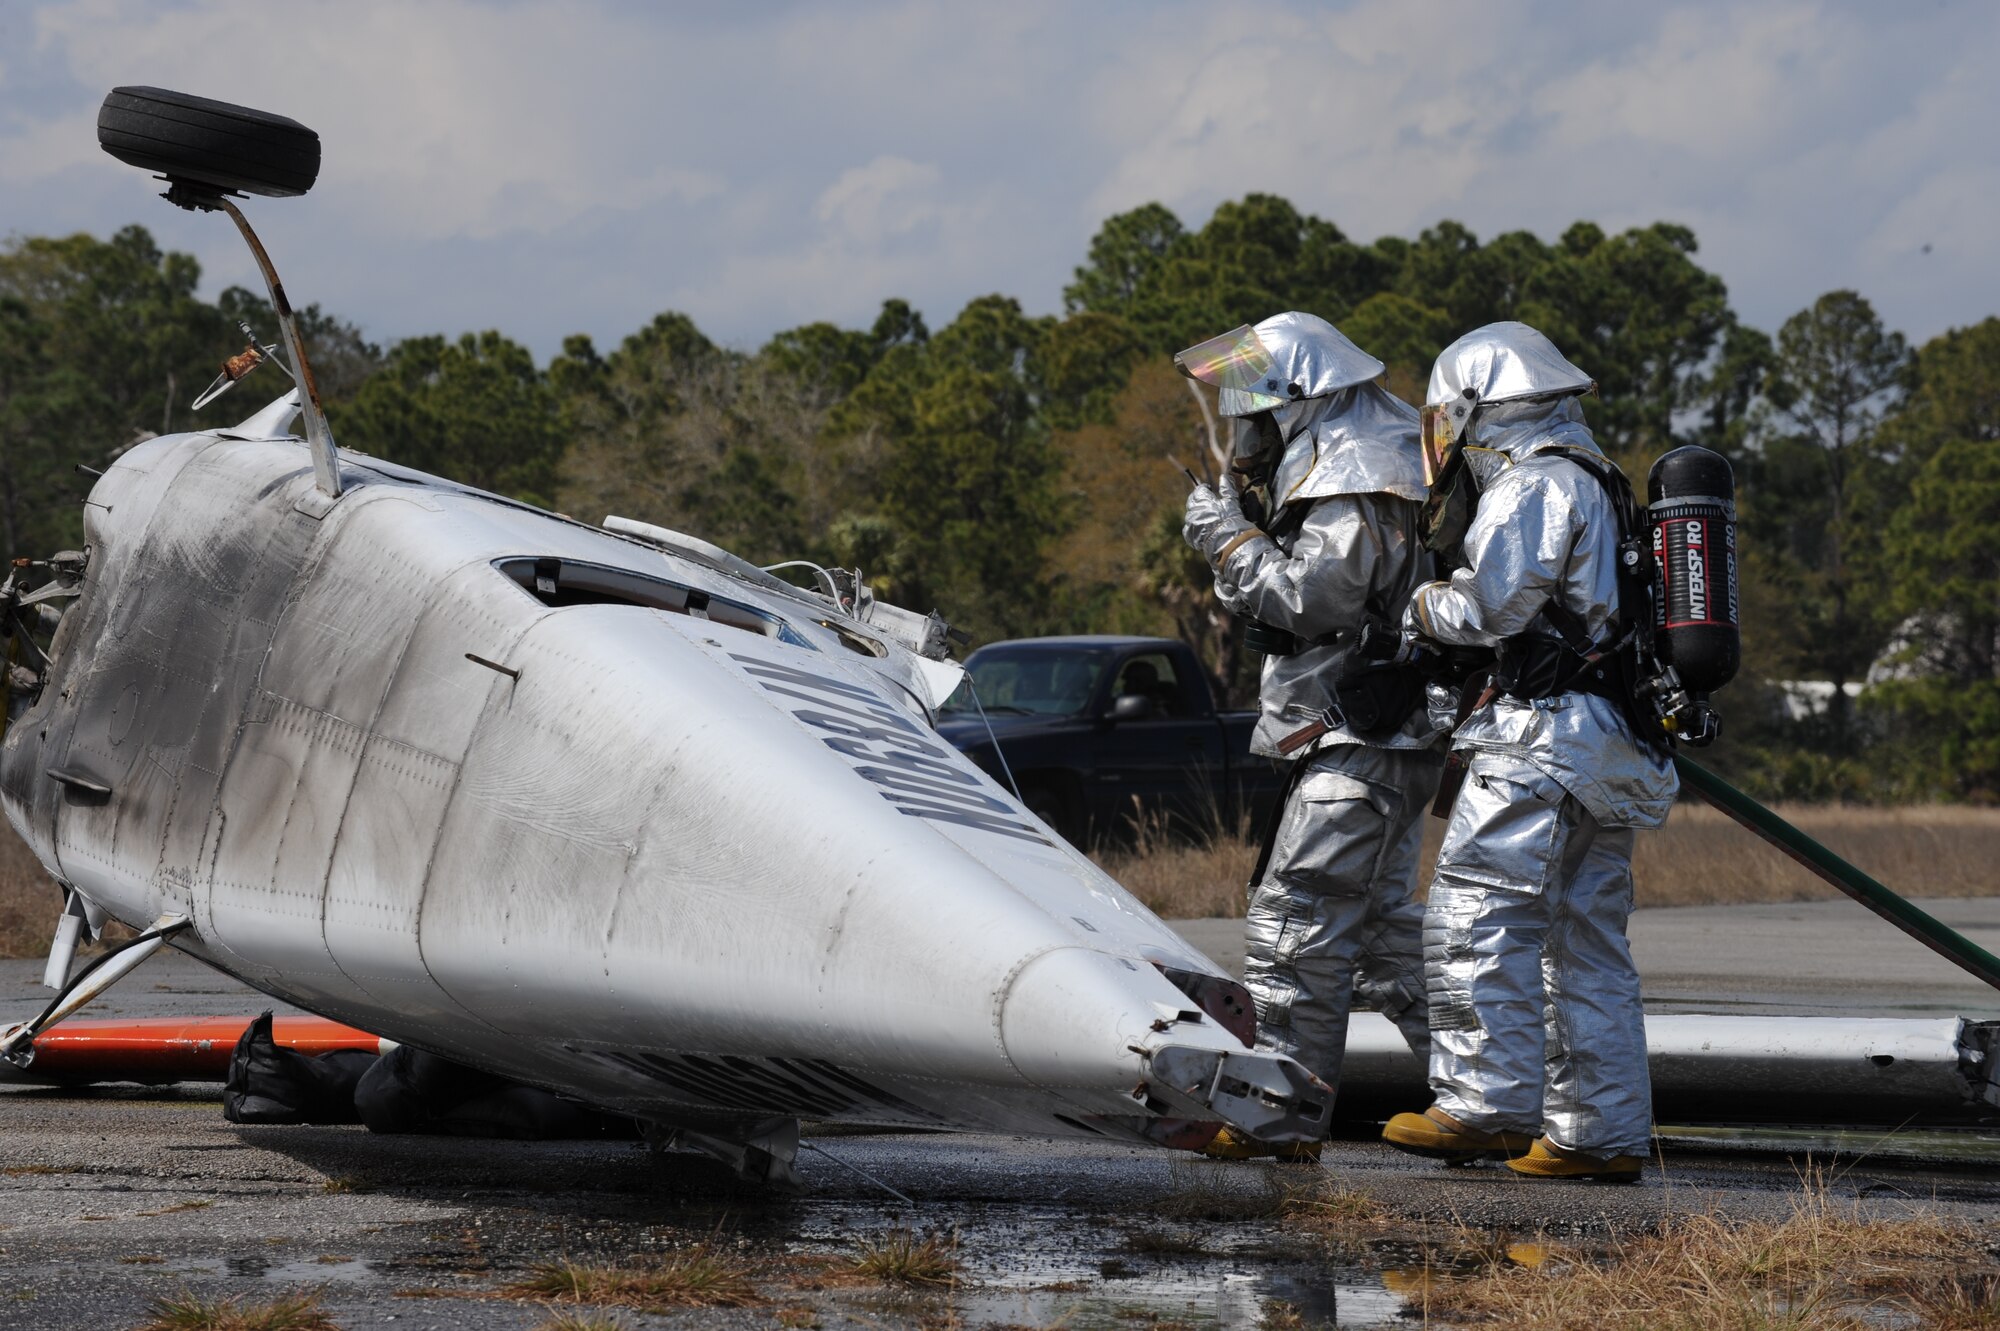 Firefighters from the 45th Civil Engineer Squadron respond to the scene of a simulated plane crash at the Malabar Training Annex during the recent weeklong Operation Ocean Breeze deployment exercise. (U.S. Air Force photo/John Connell)